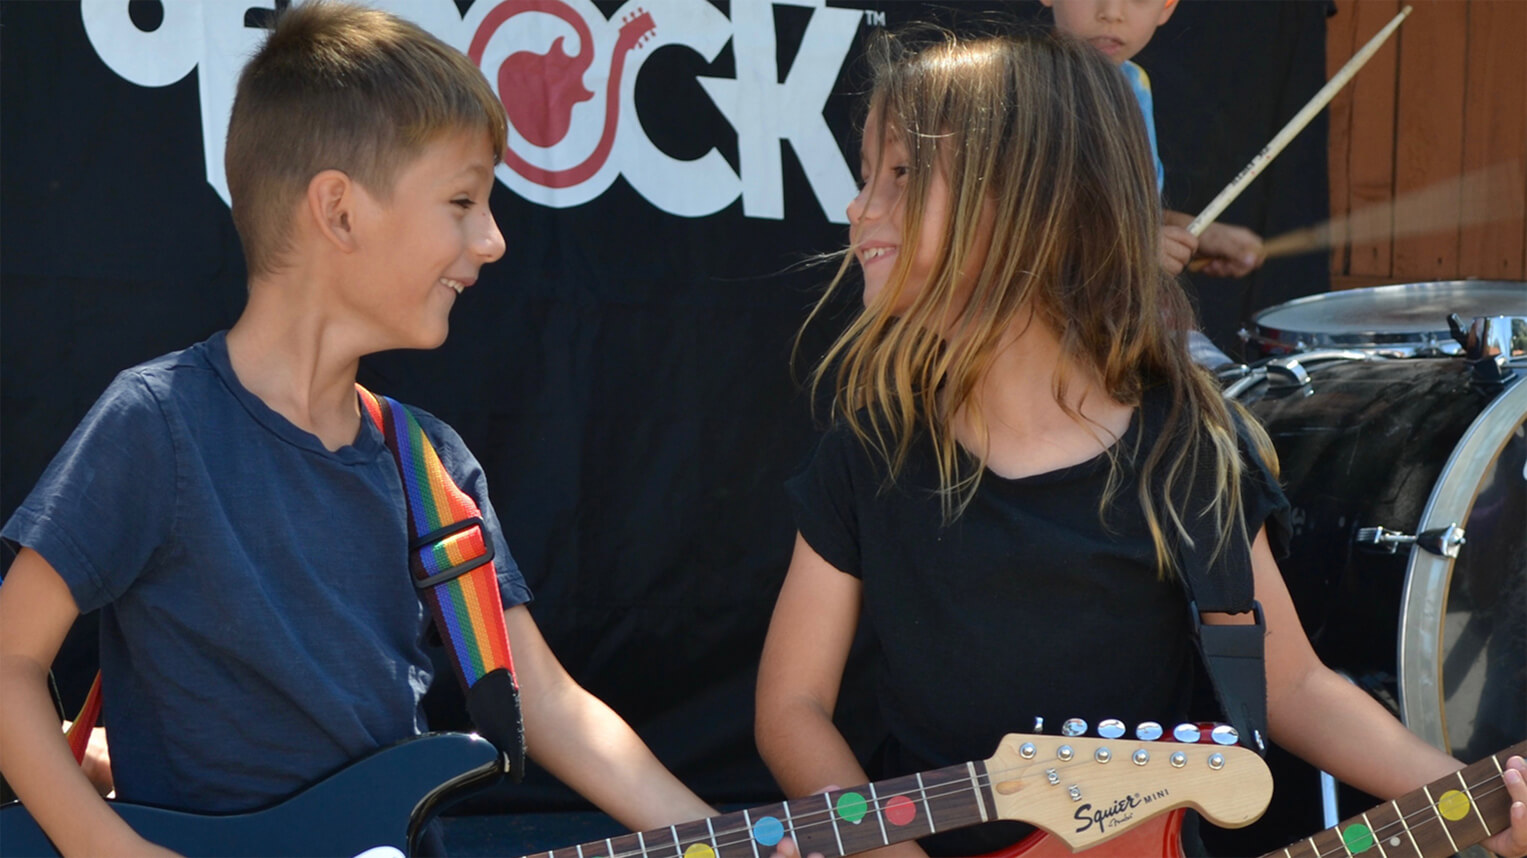 summer camp, guitar lessons, bass lessons, no experience needed, drum lessons, guitarists looking at each other, rock out on stage, kid playing guitar